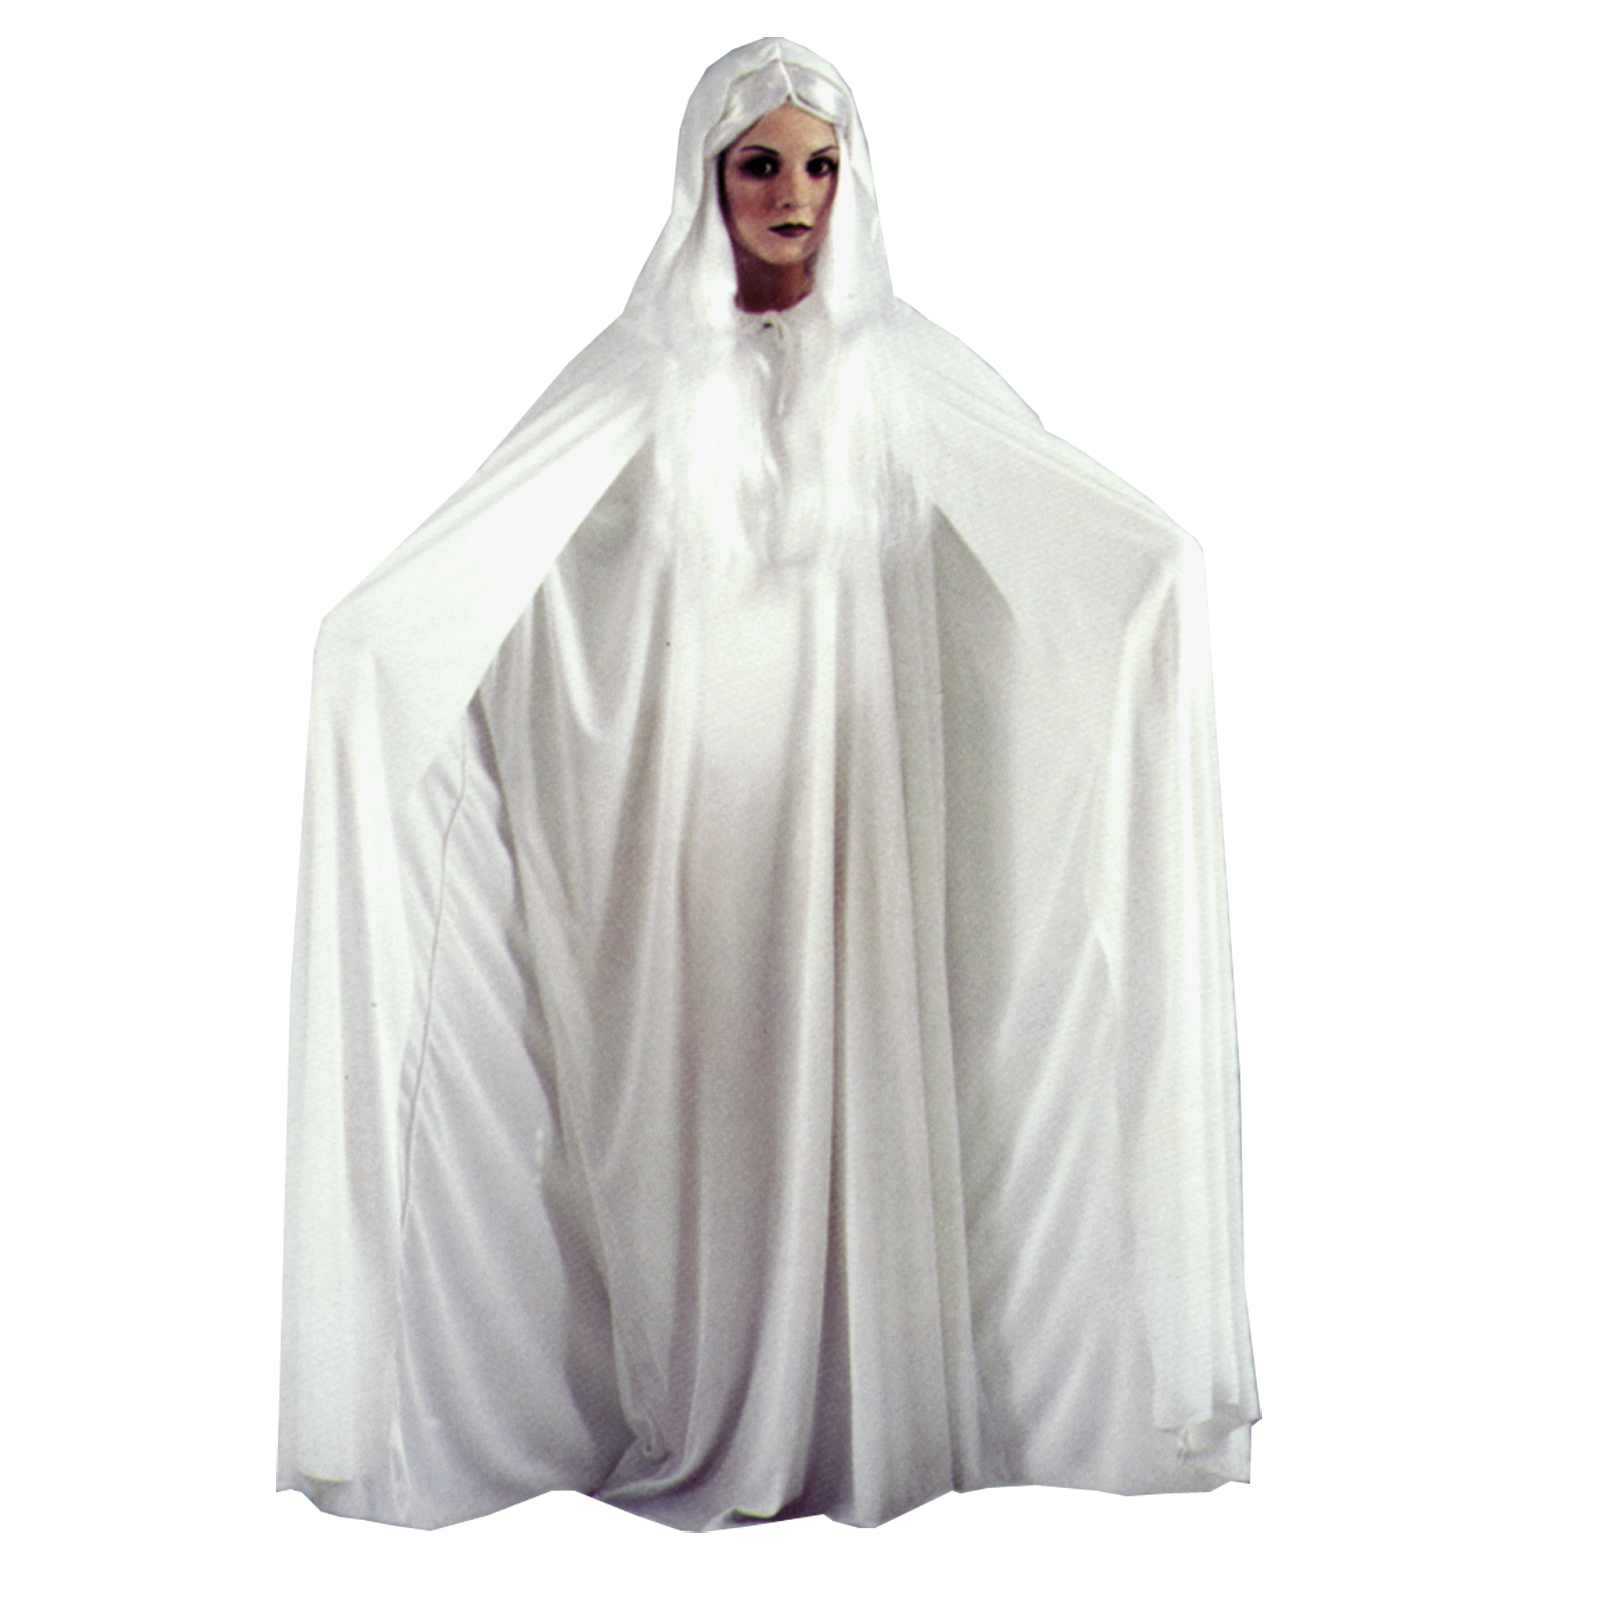 Women&#8217;s Gossamer Ghost Costume Size: One Size Fits Most